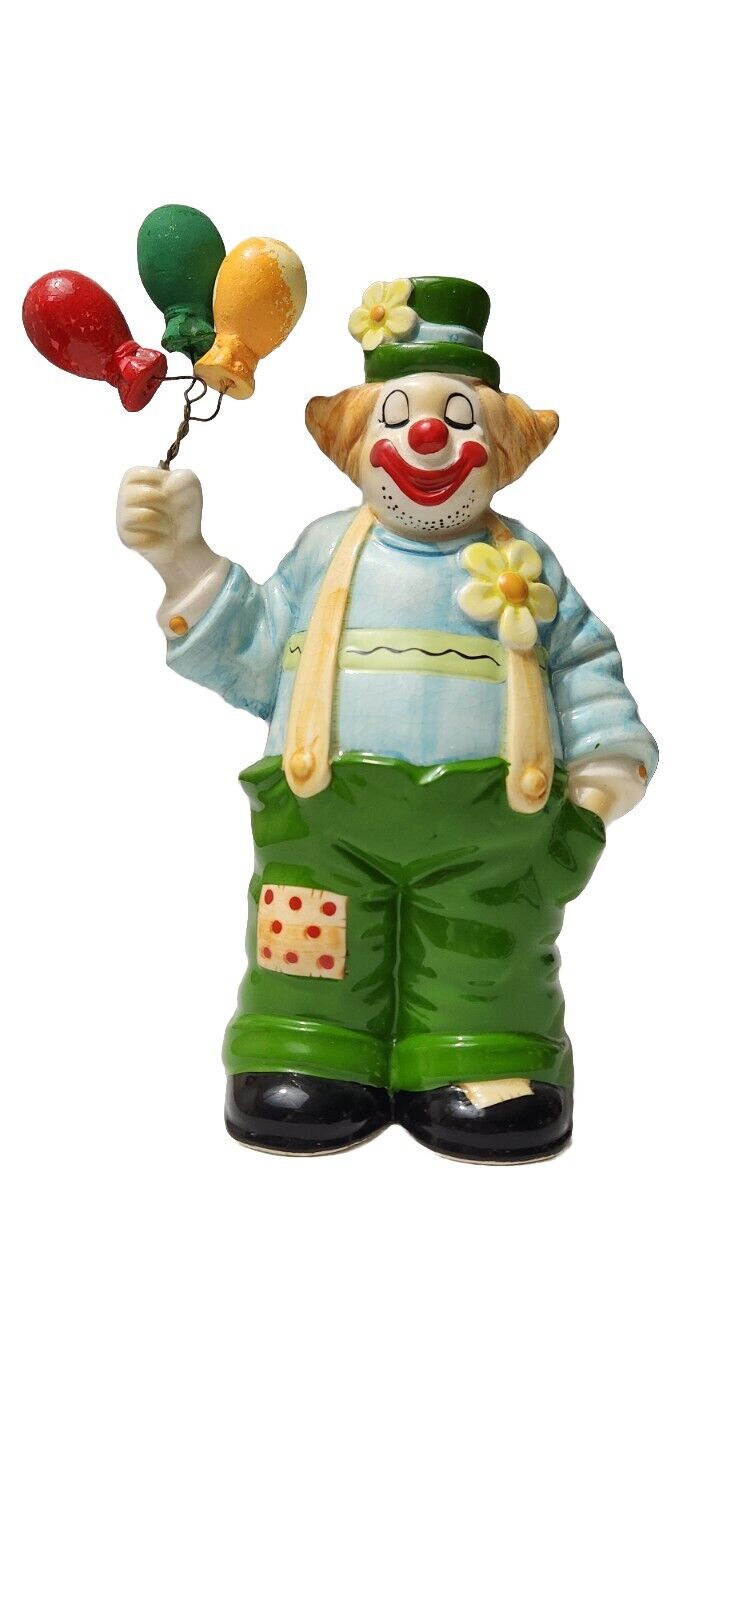 Enesco Happy Clown Figurine Bank Vintage with Stopper Balloons Circus  